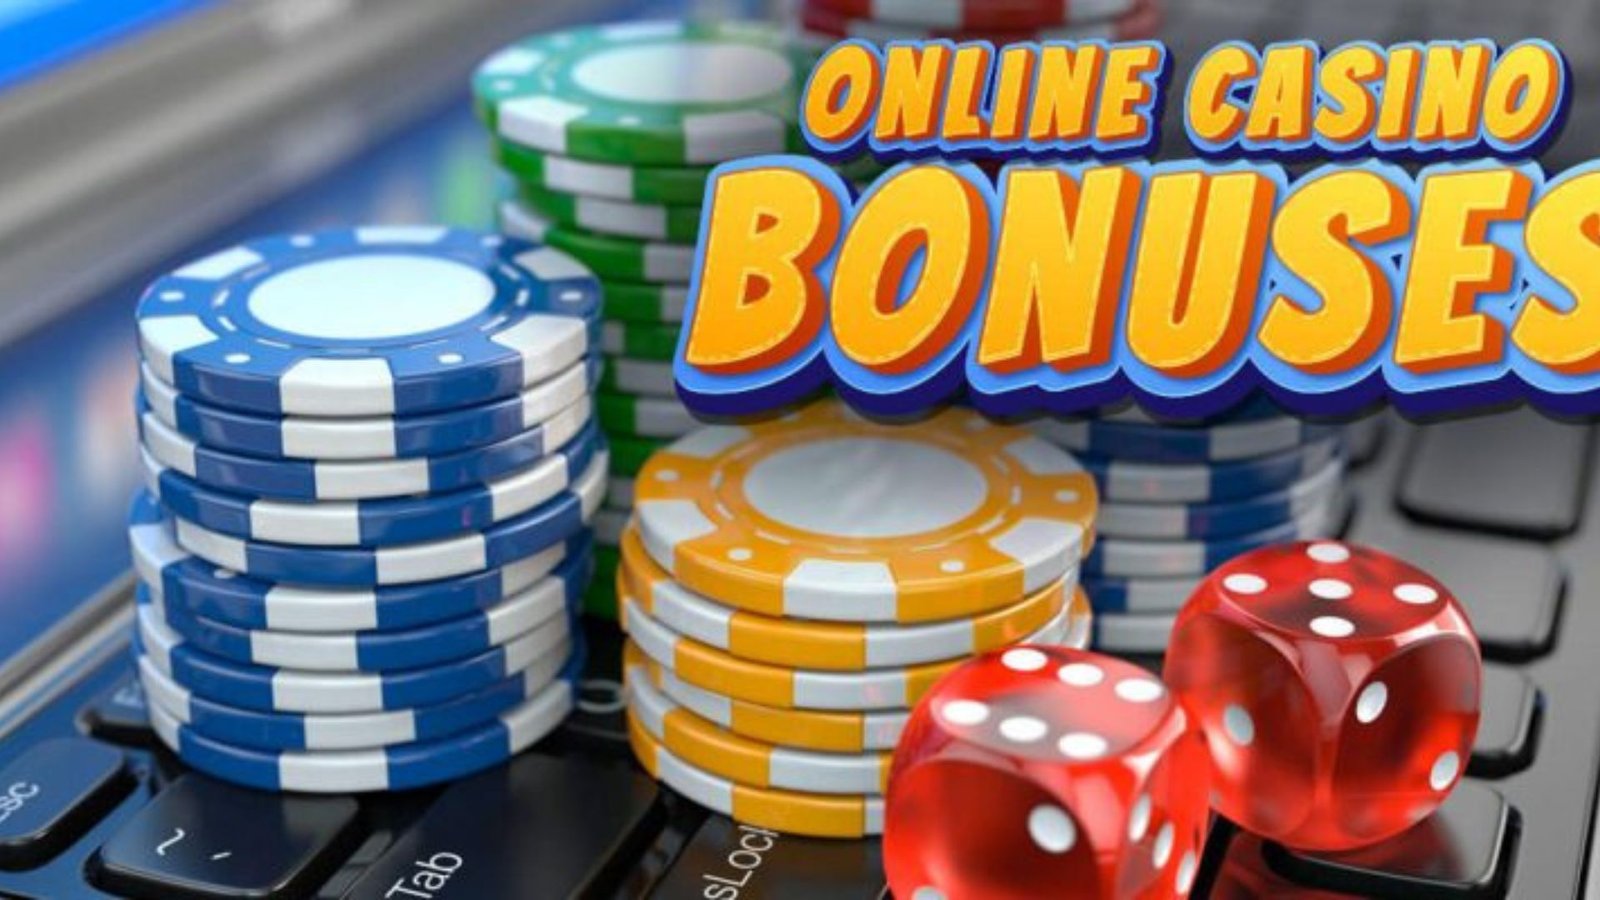 How to wager online casino bonuses